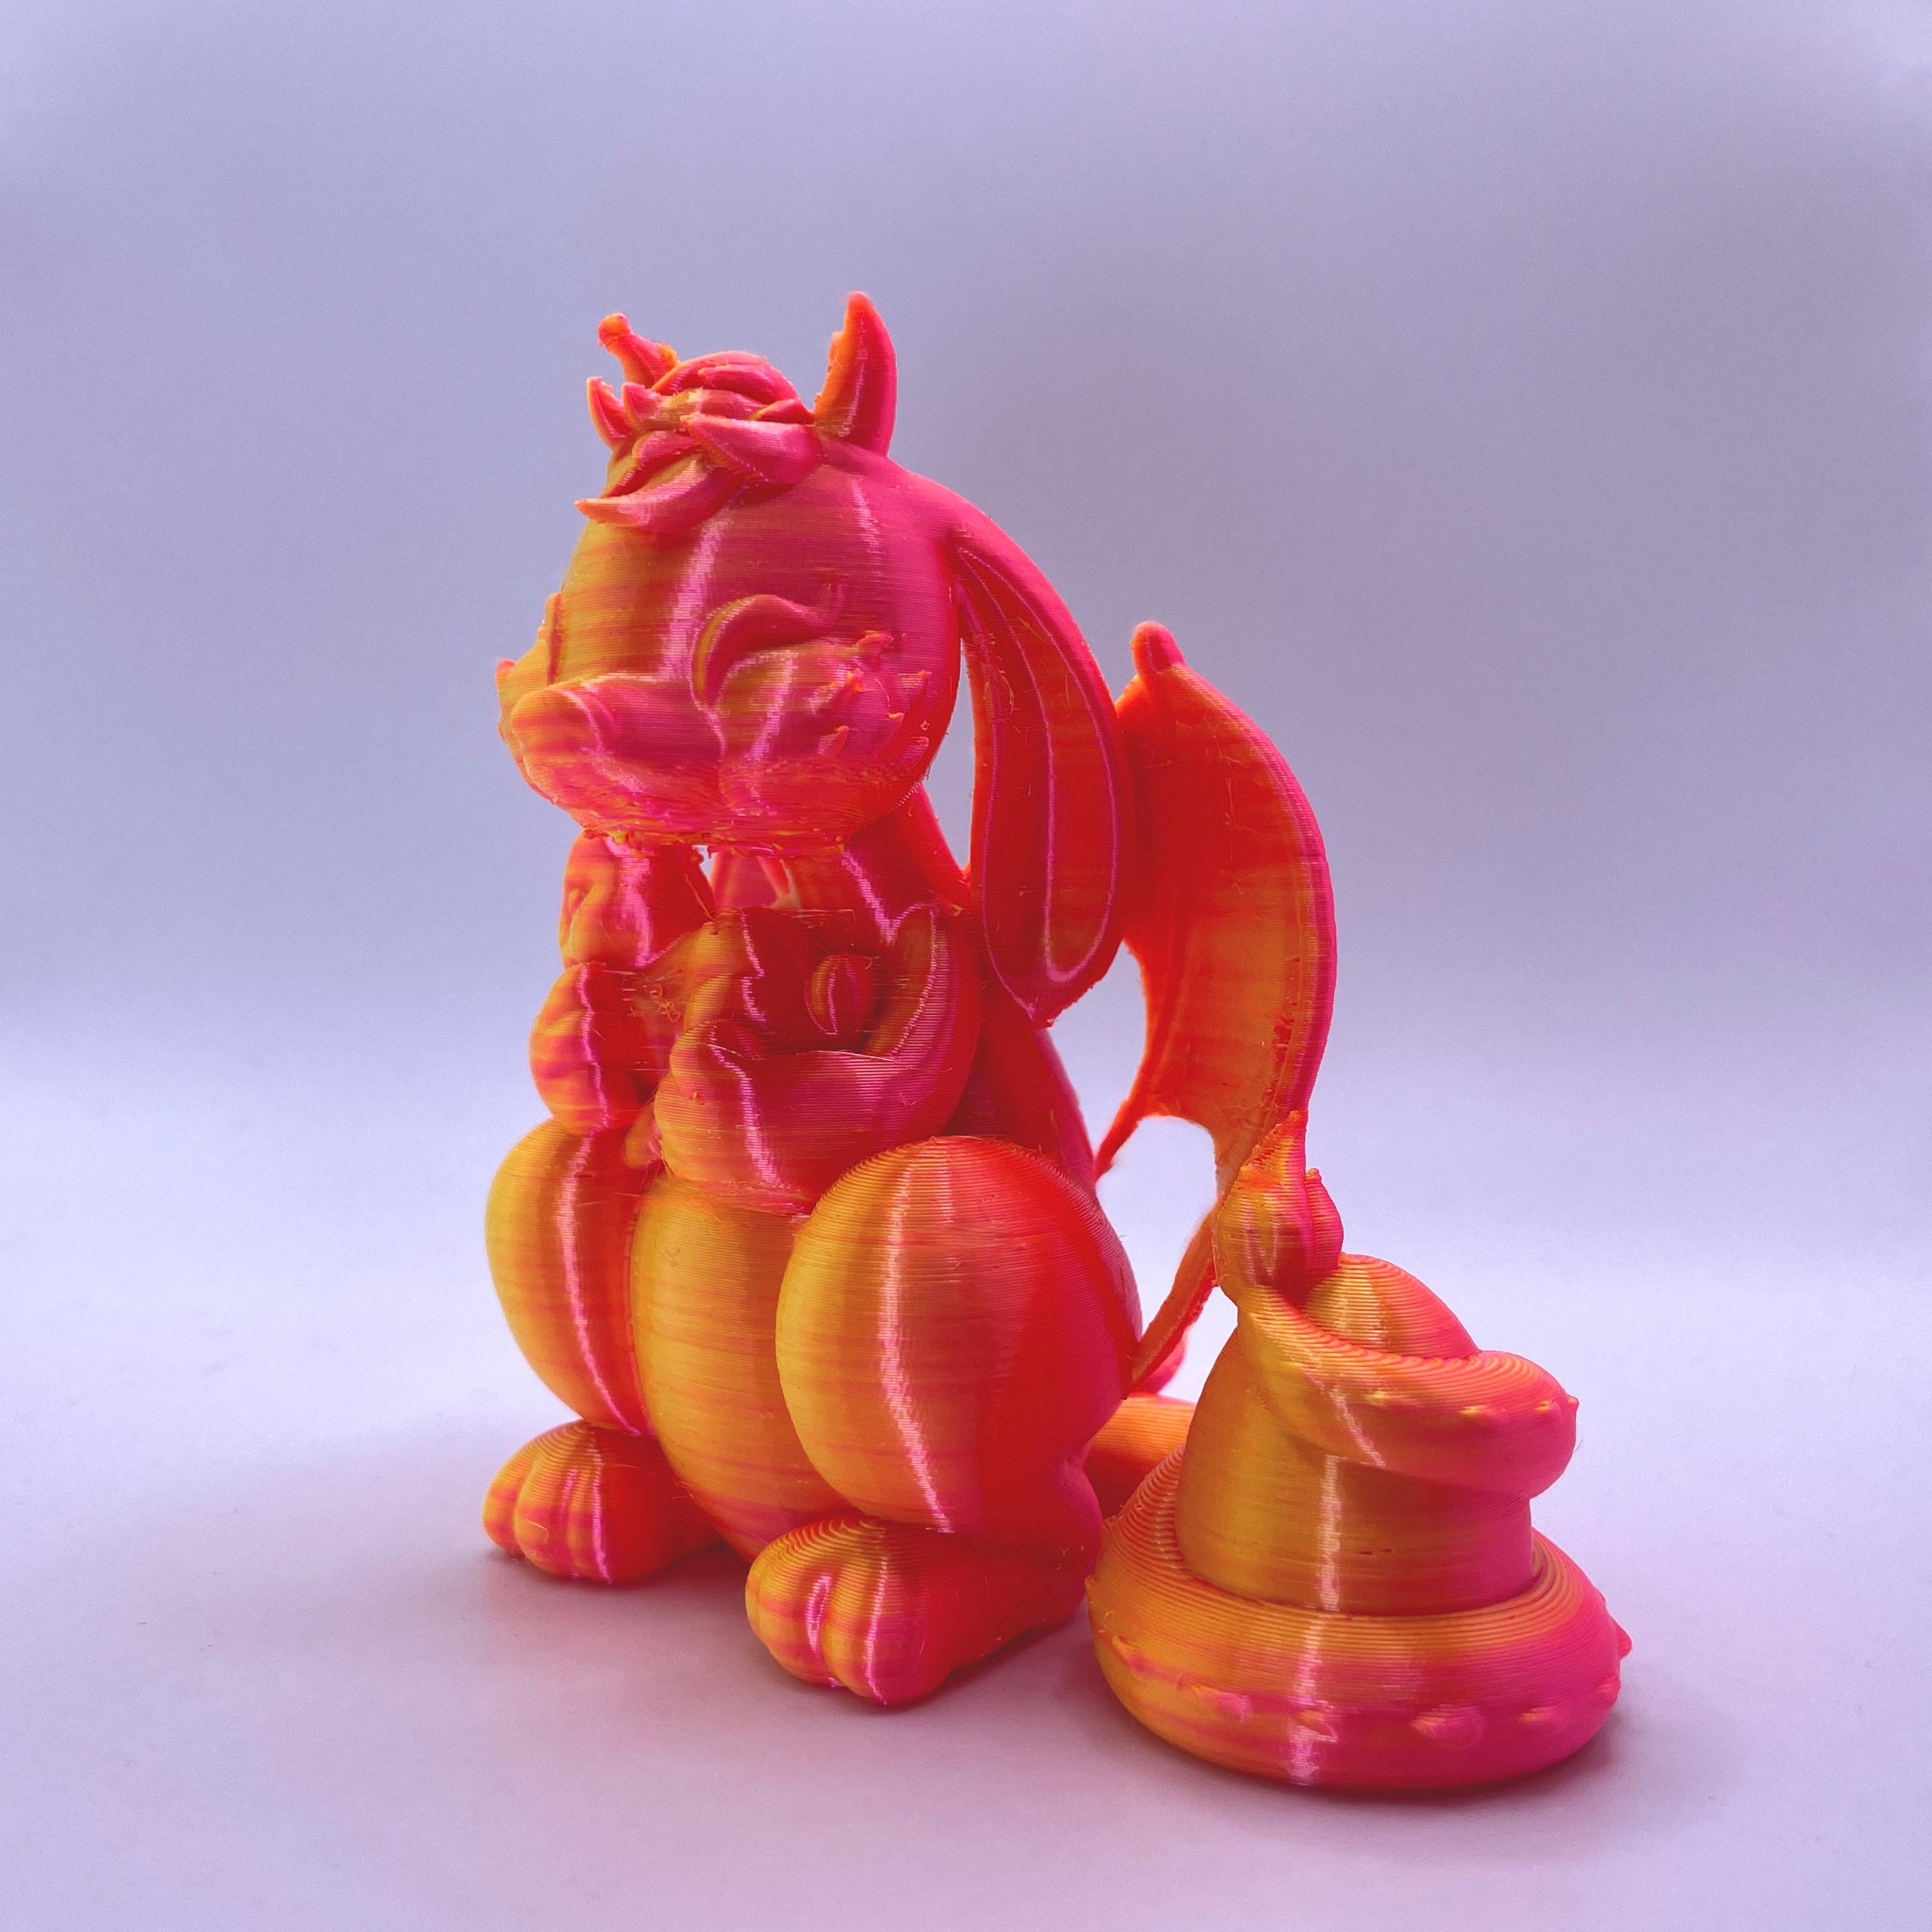 Bunny the Baby Dragon - Sparta3D Prismatic Yellow/Pink PLA!  Totes adorbs!  Happy Easter! - 3d model